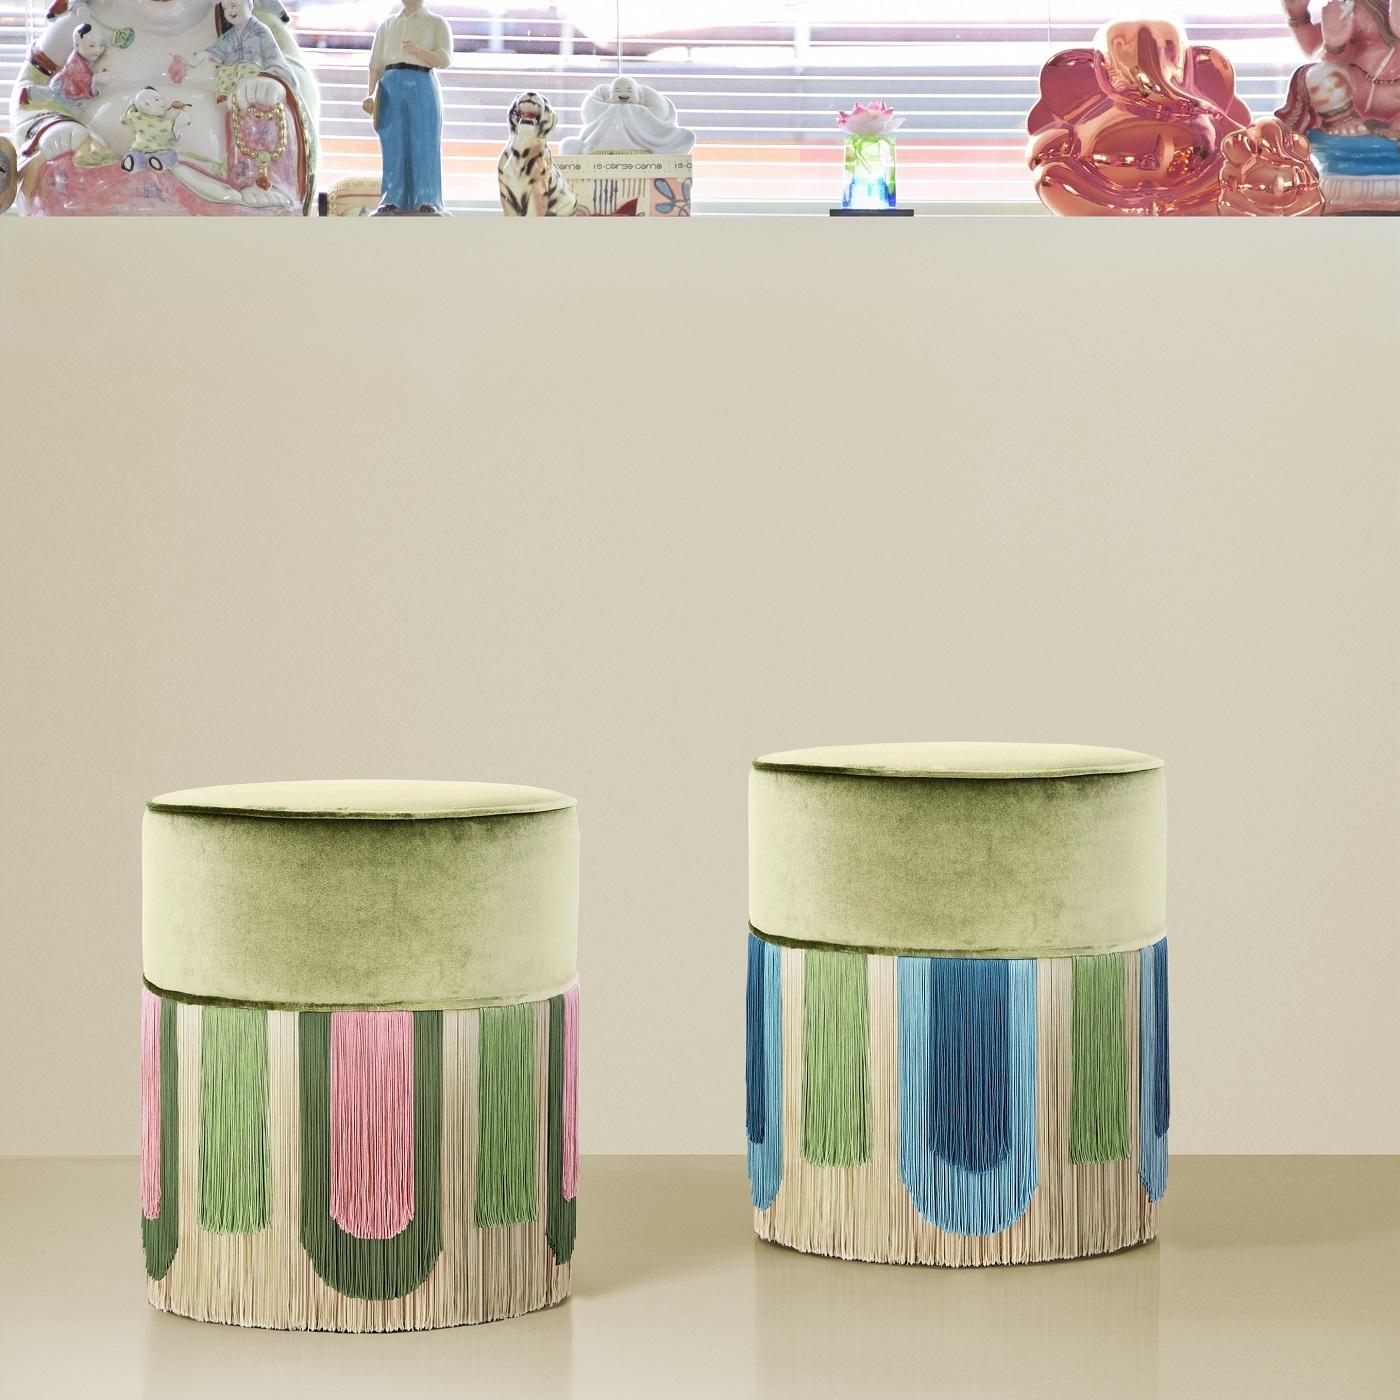 Perfectly paired pink and green are a delightful palette for the Art Deco-inspired fringe on this pouf from the Geometric Couture Collection. Made in Italy, the pouf is crafted on a painted beechwood base, hidden by expertly cut viscose fringe in